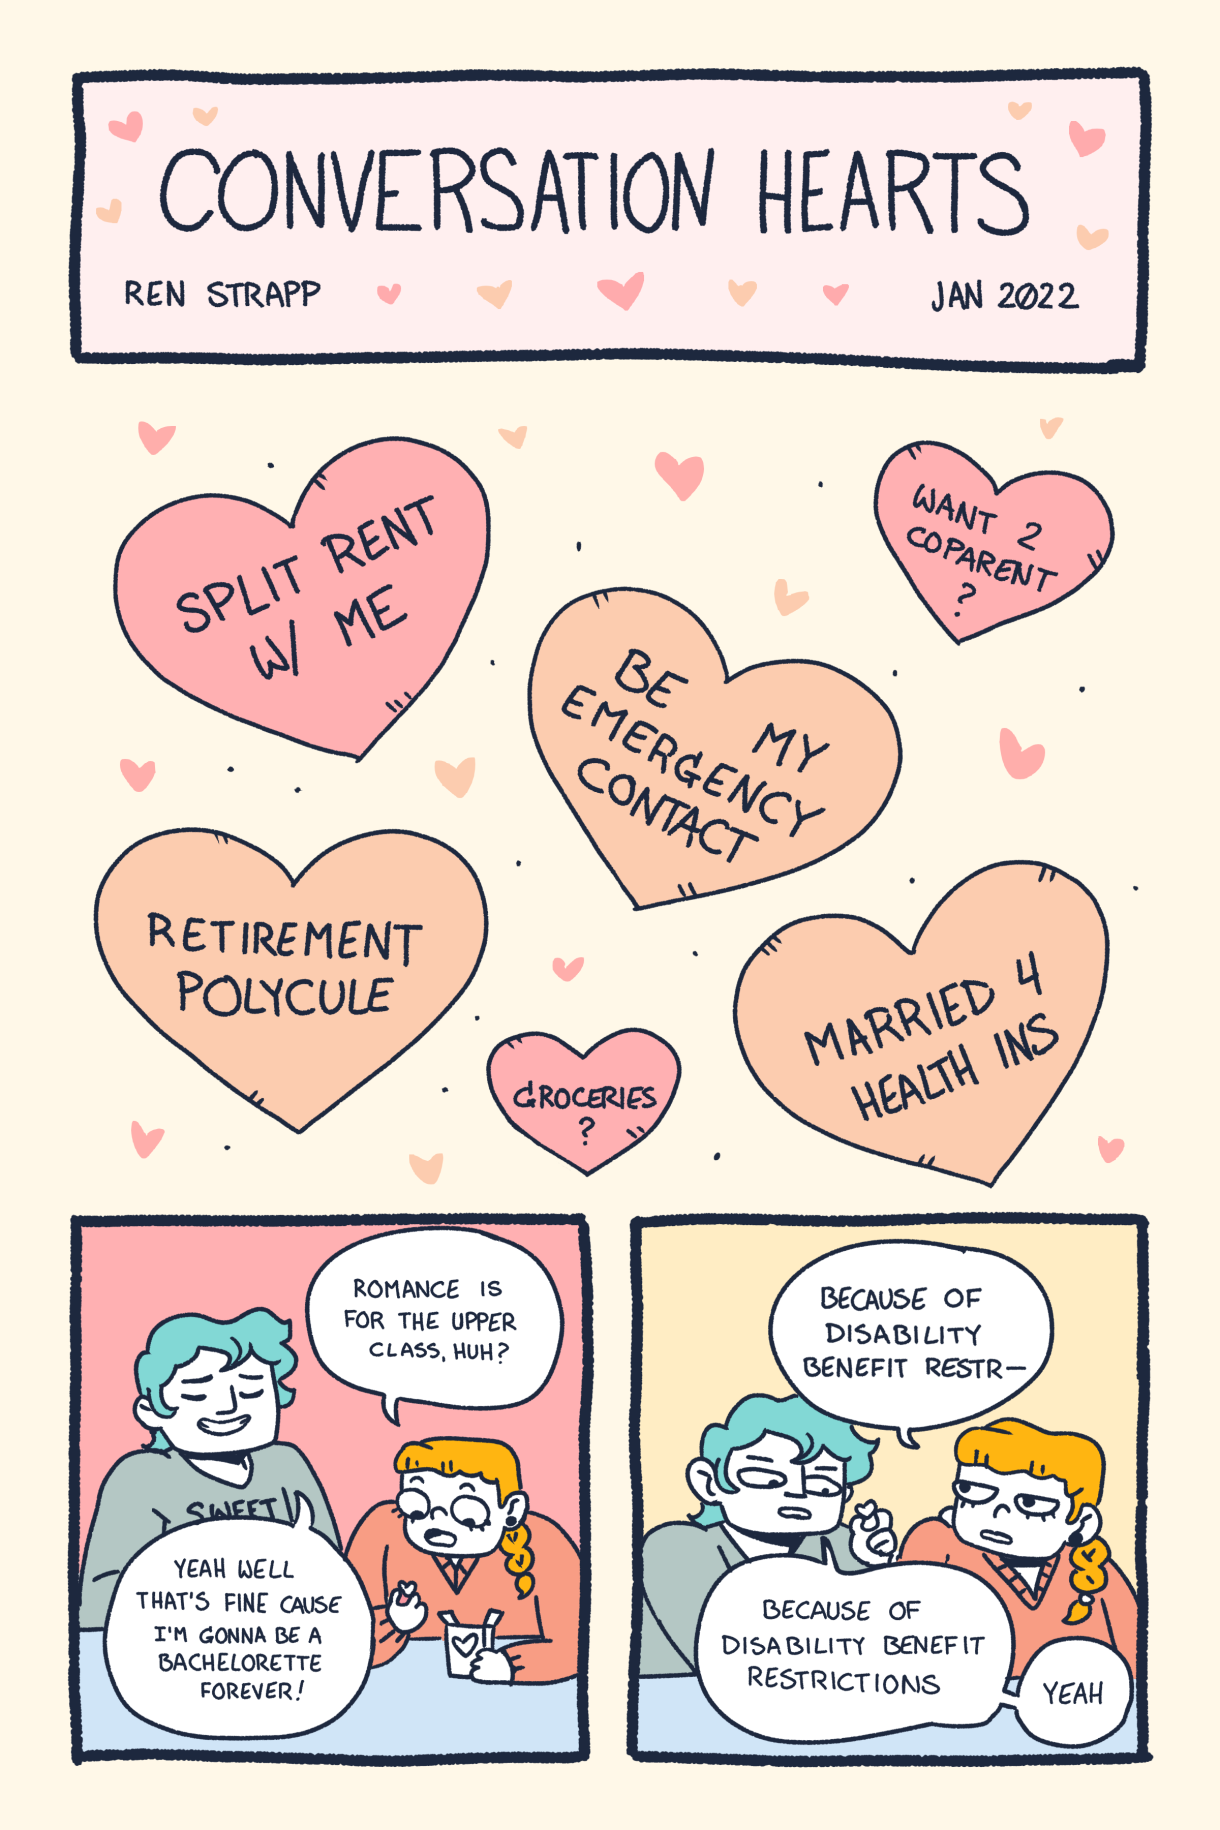 A design of candy hearts that say "split rent with me" and "be my emergency contact" and "retirement polycule" And then there are two friends sorting out the hearts, and they say that romance is dead because no one can afford it in capitalism. One friend says they will be a bachelorette forever because of disability benefit restrictions.